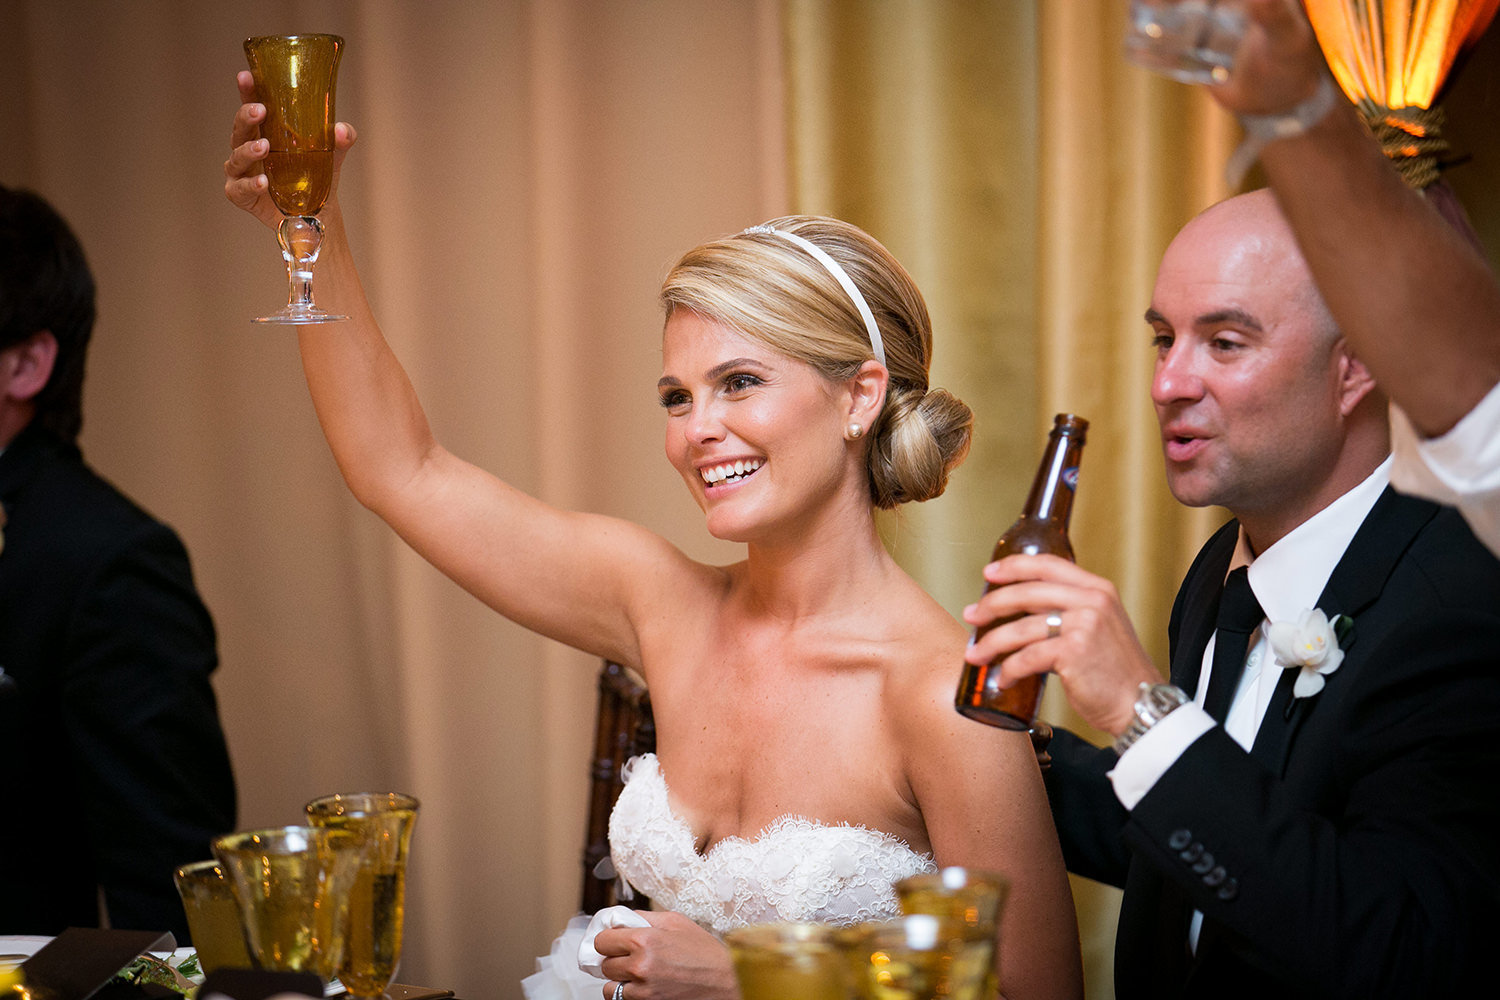 Cheers!  Toasts during the wedding reception at St. Regis Resort\